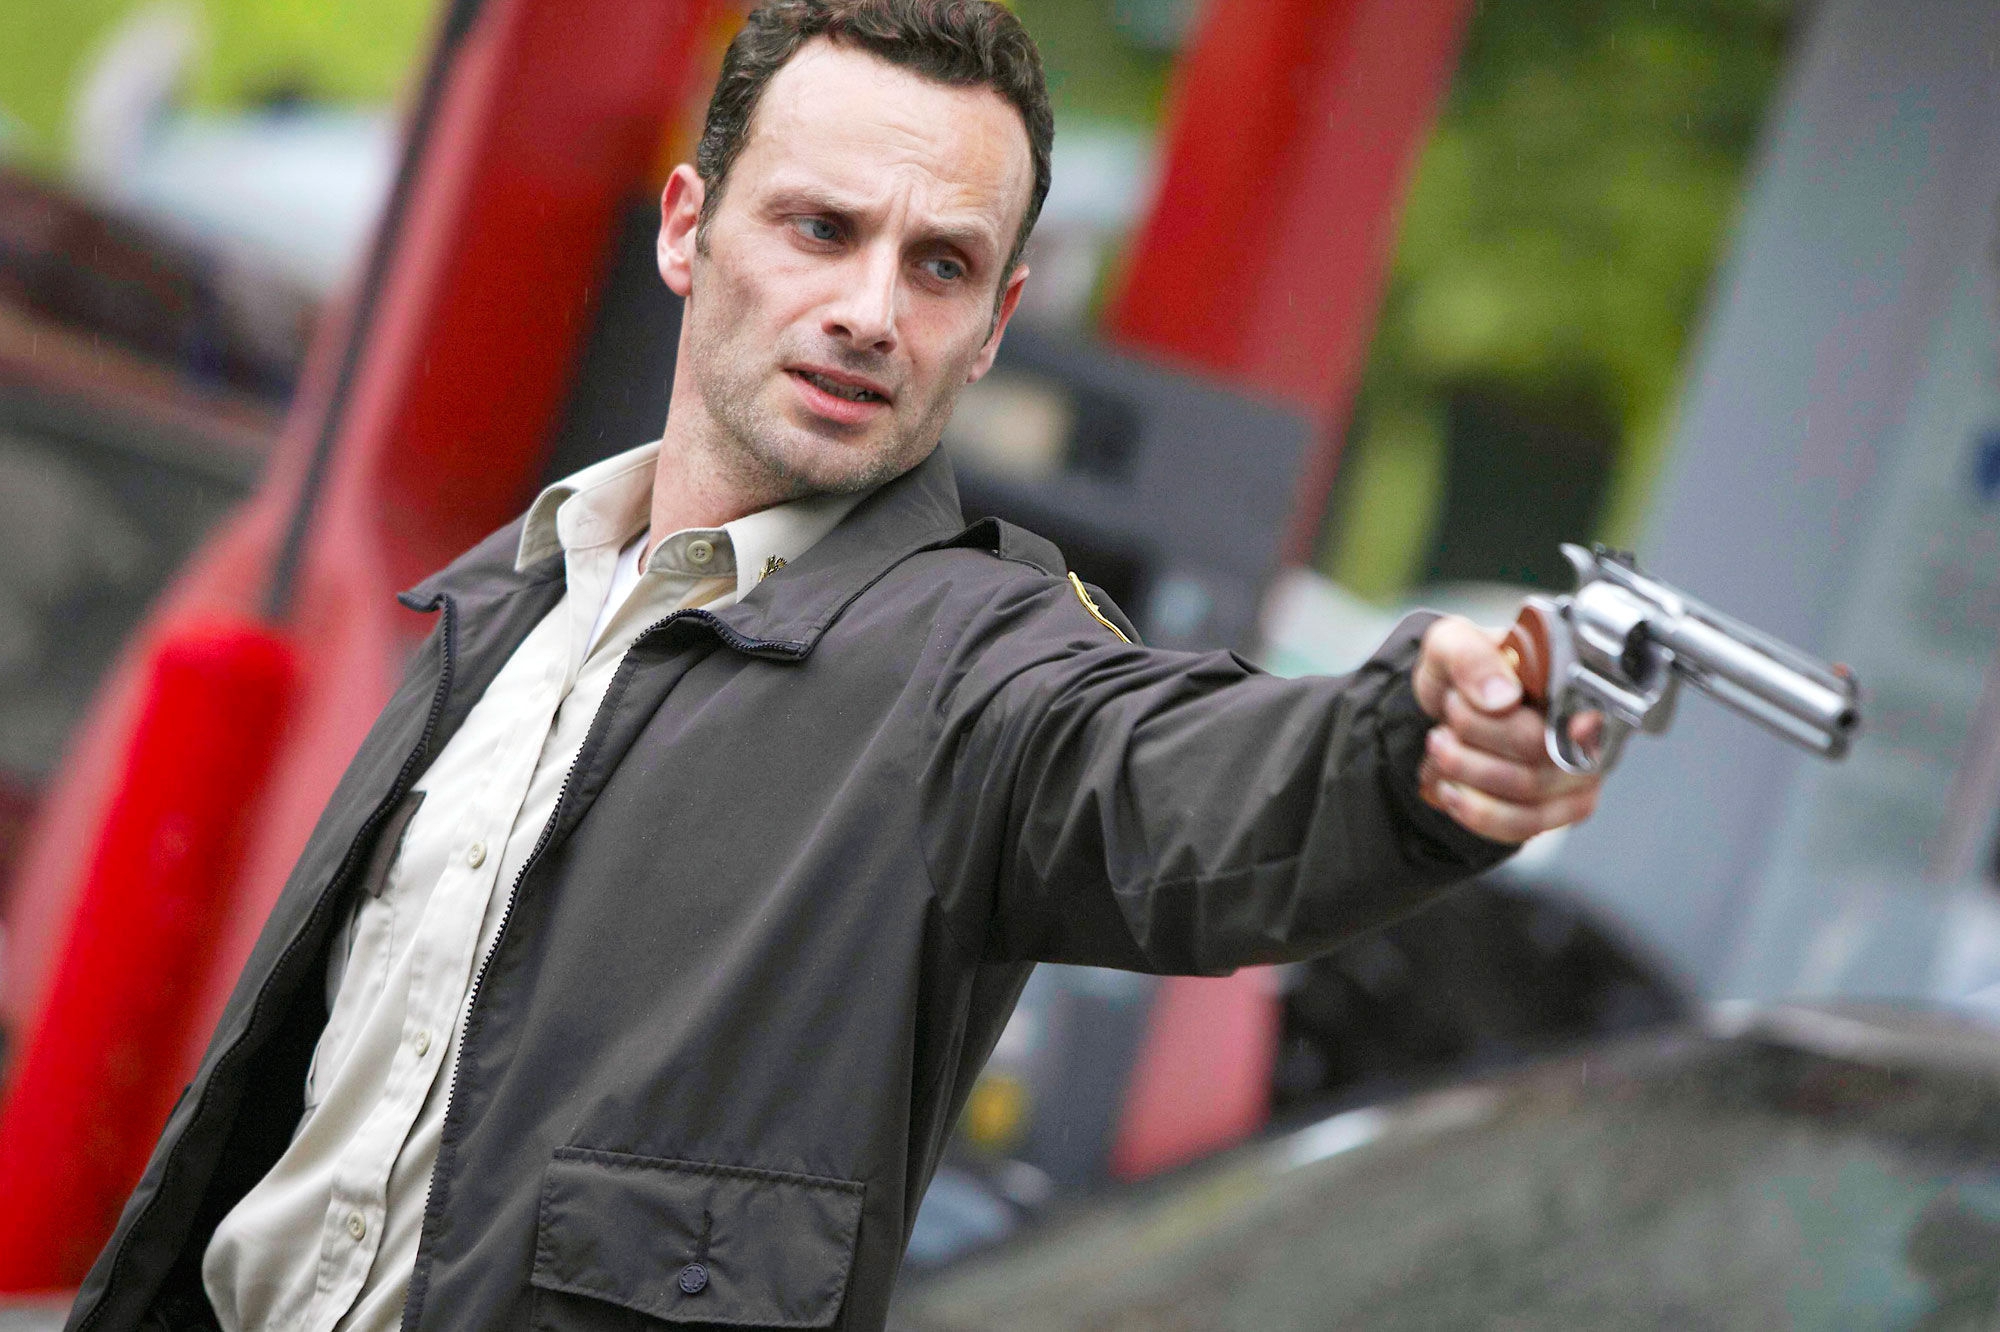 Andrew Lincoln Wallpaper Image Photos Pictures Background